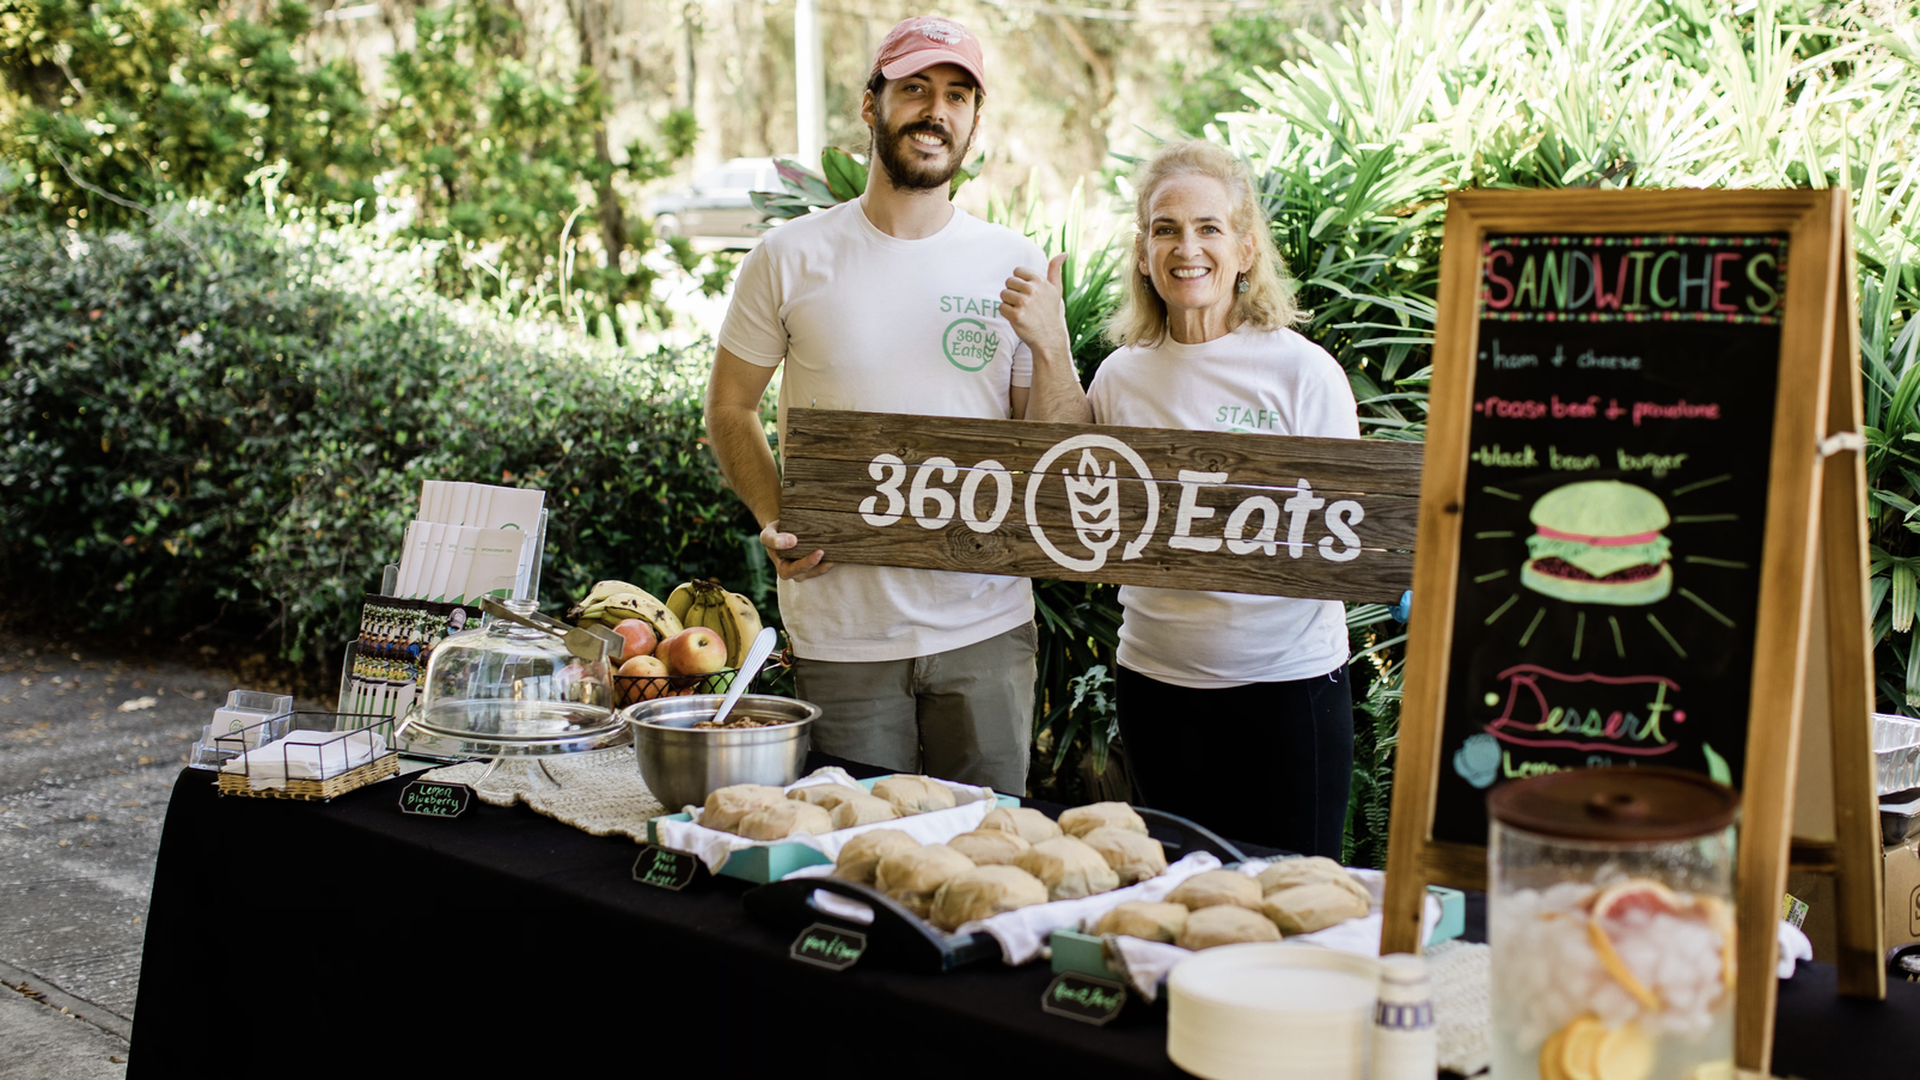 Cameron and Ellen Macleish holding a 360 Eats sign